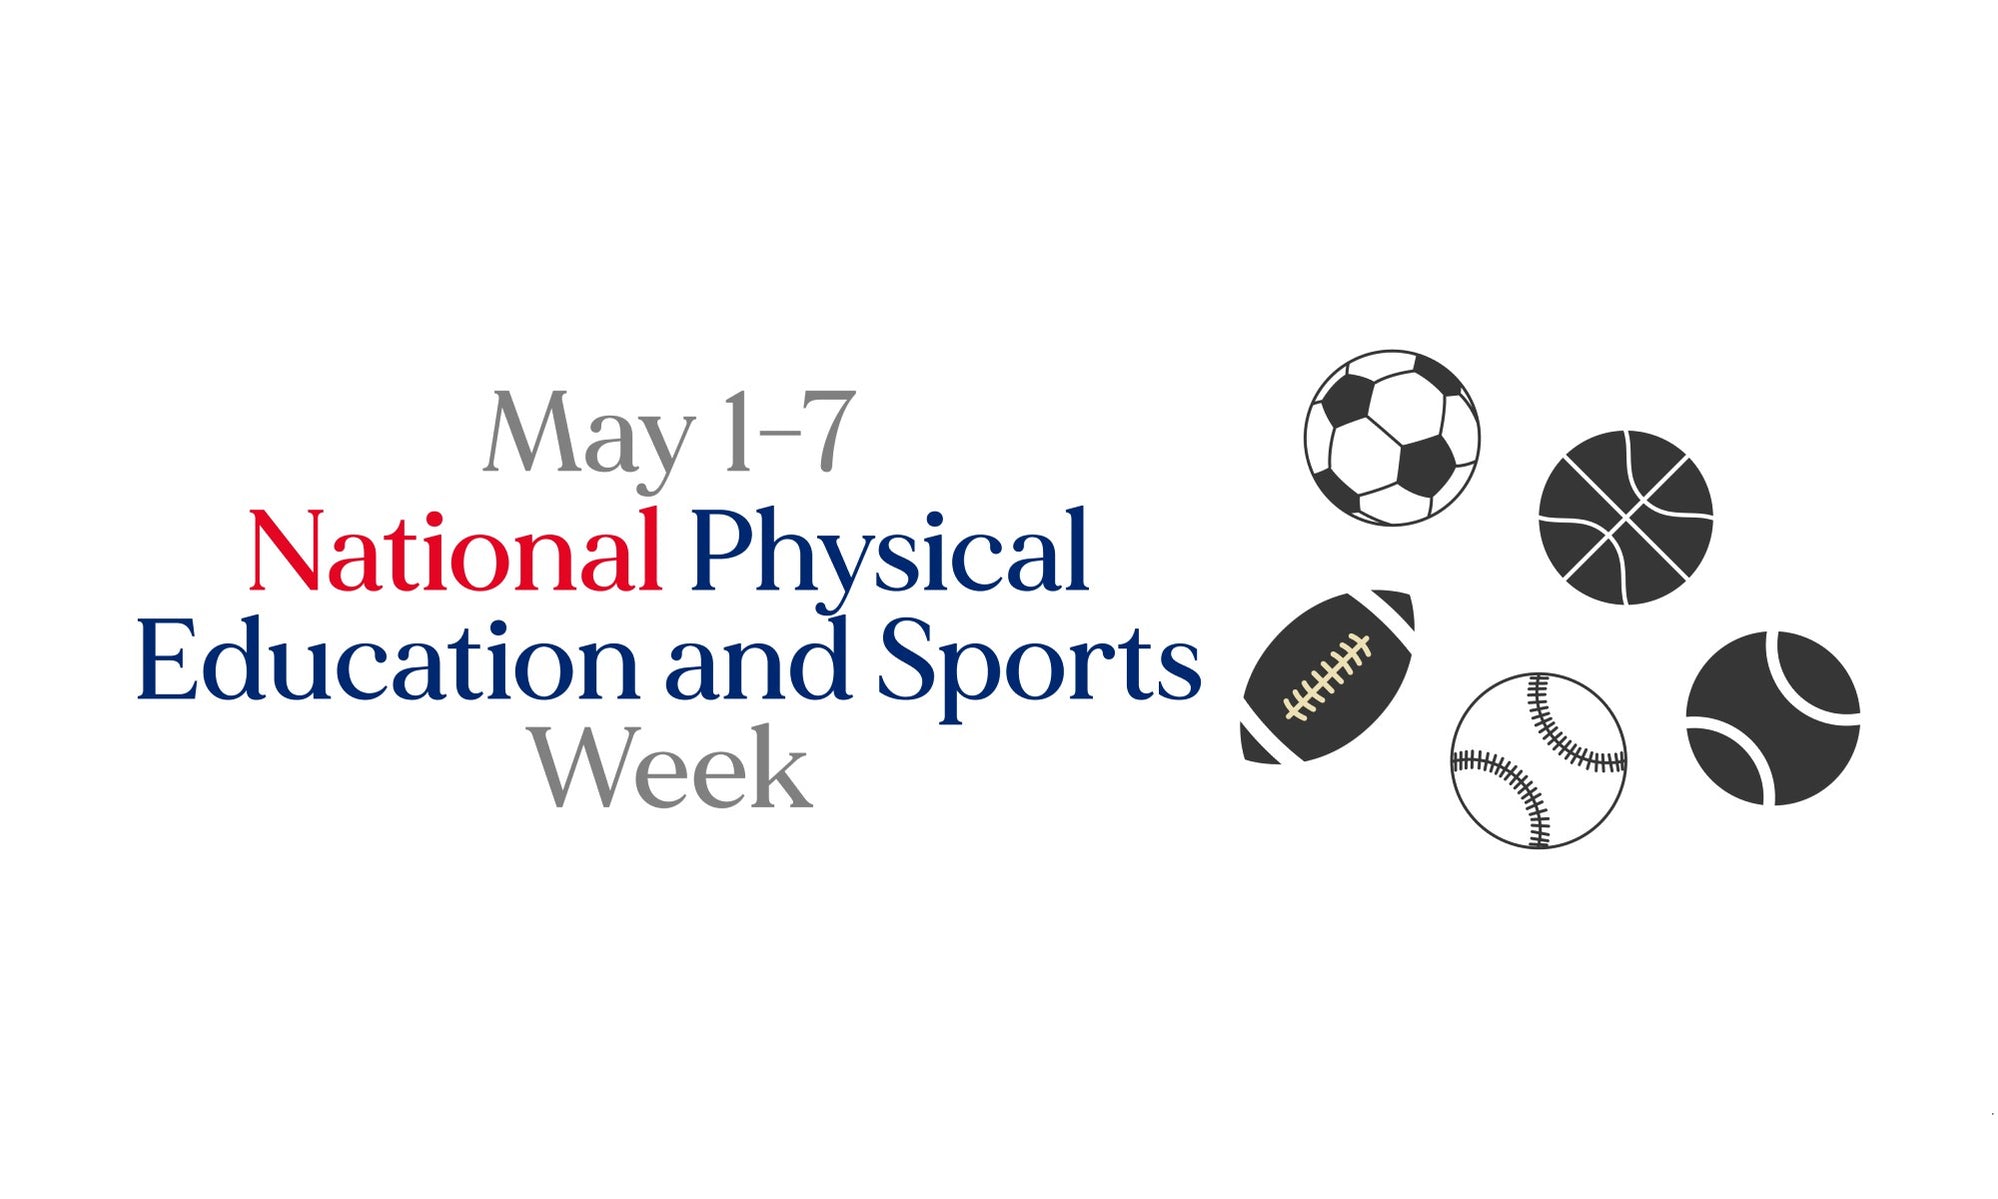 National Physical Education and Sports Week 5 Ways to Stay Active